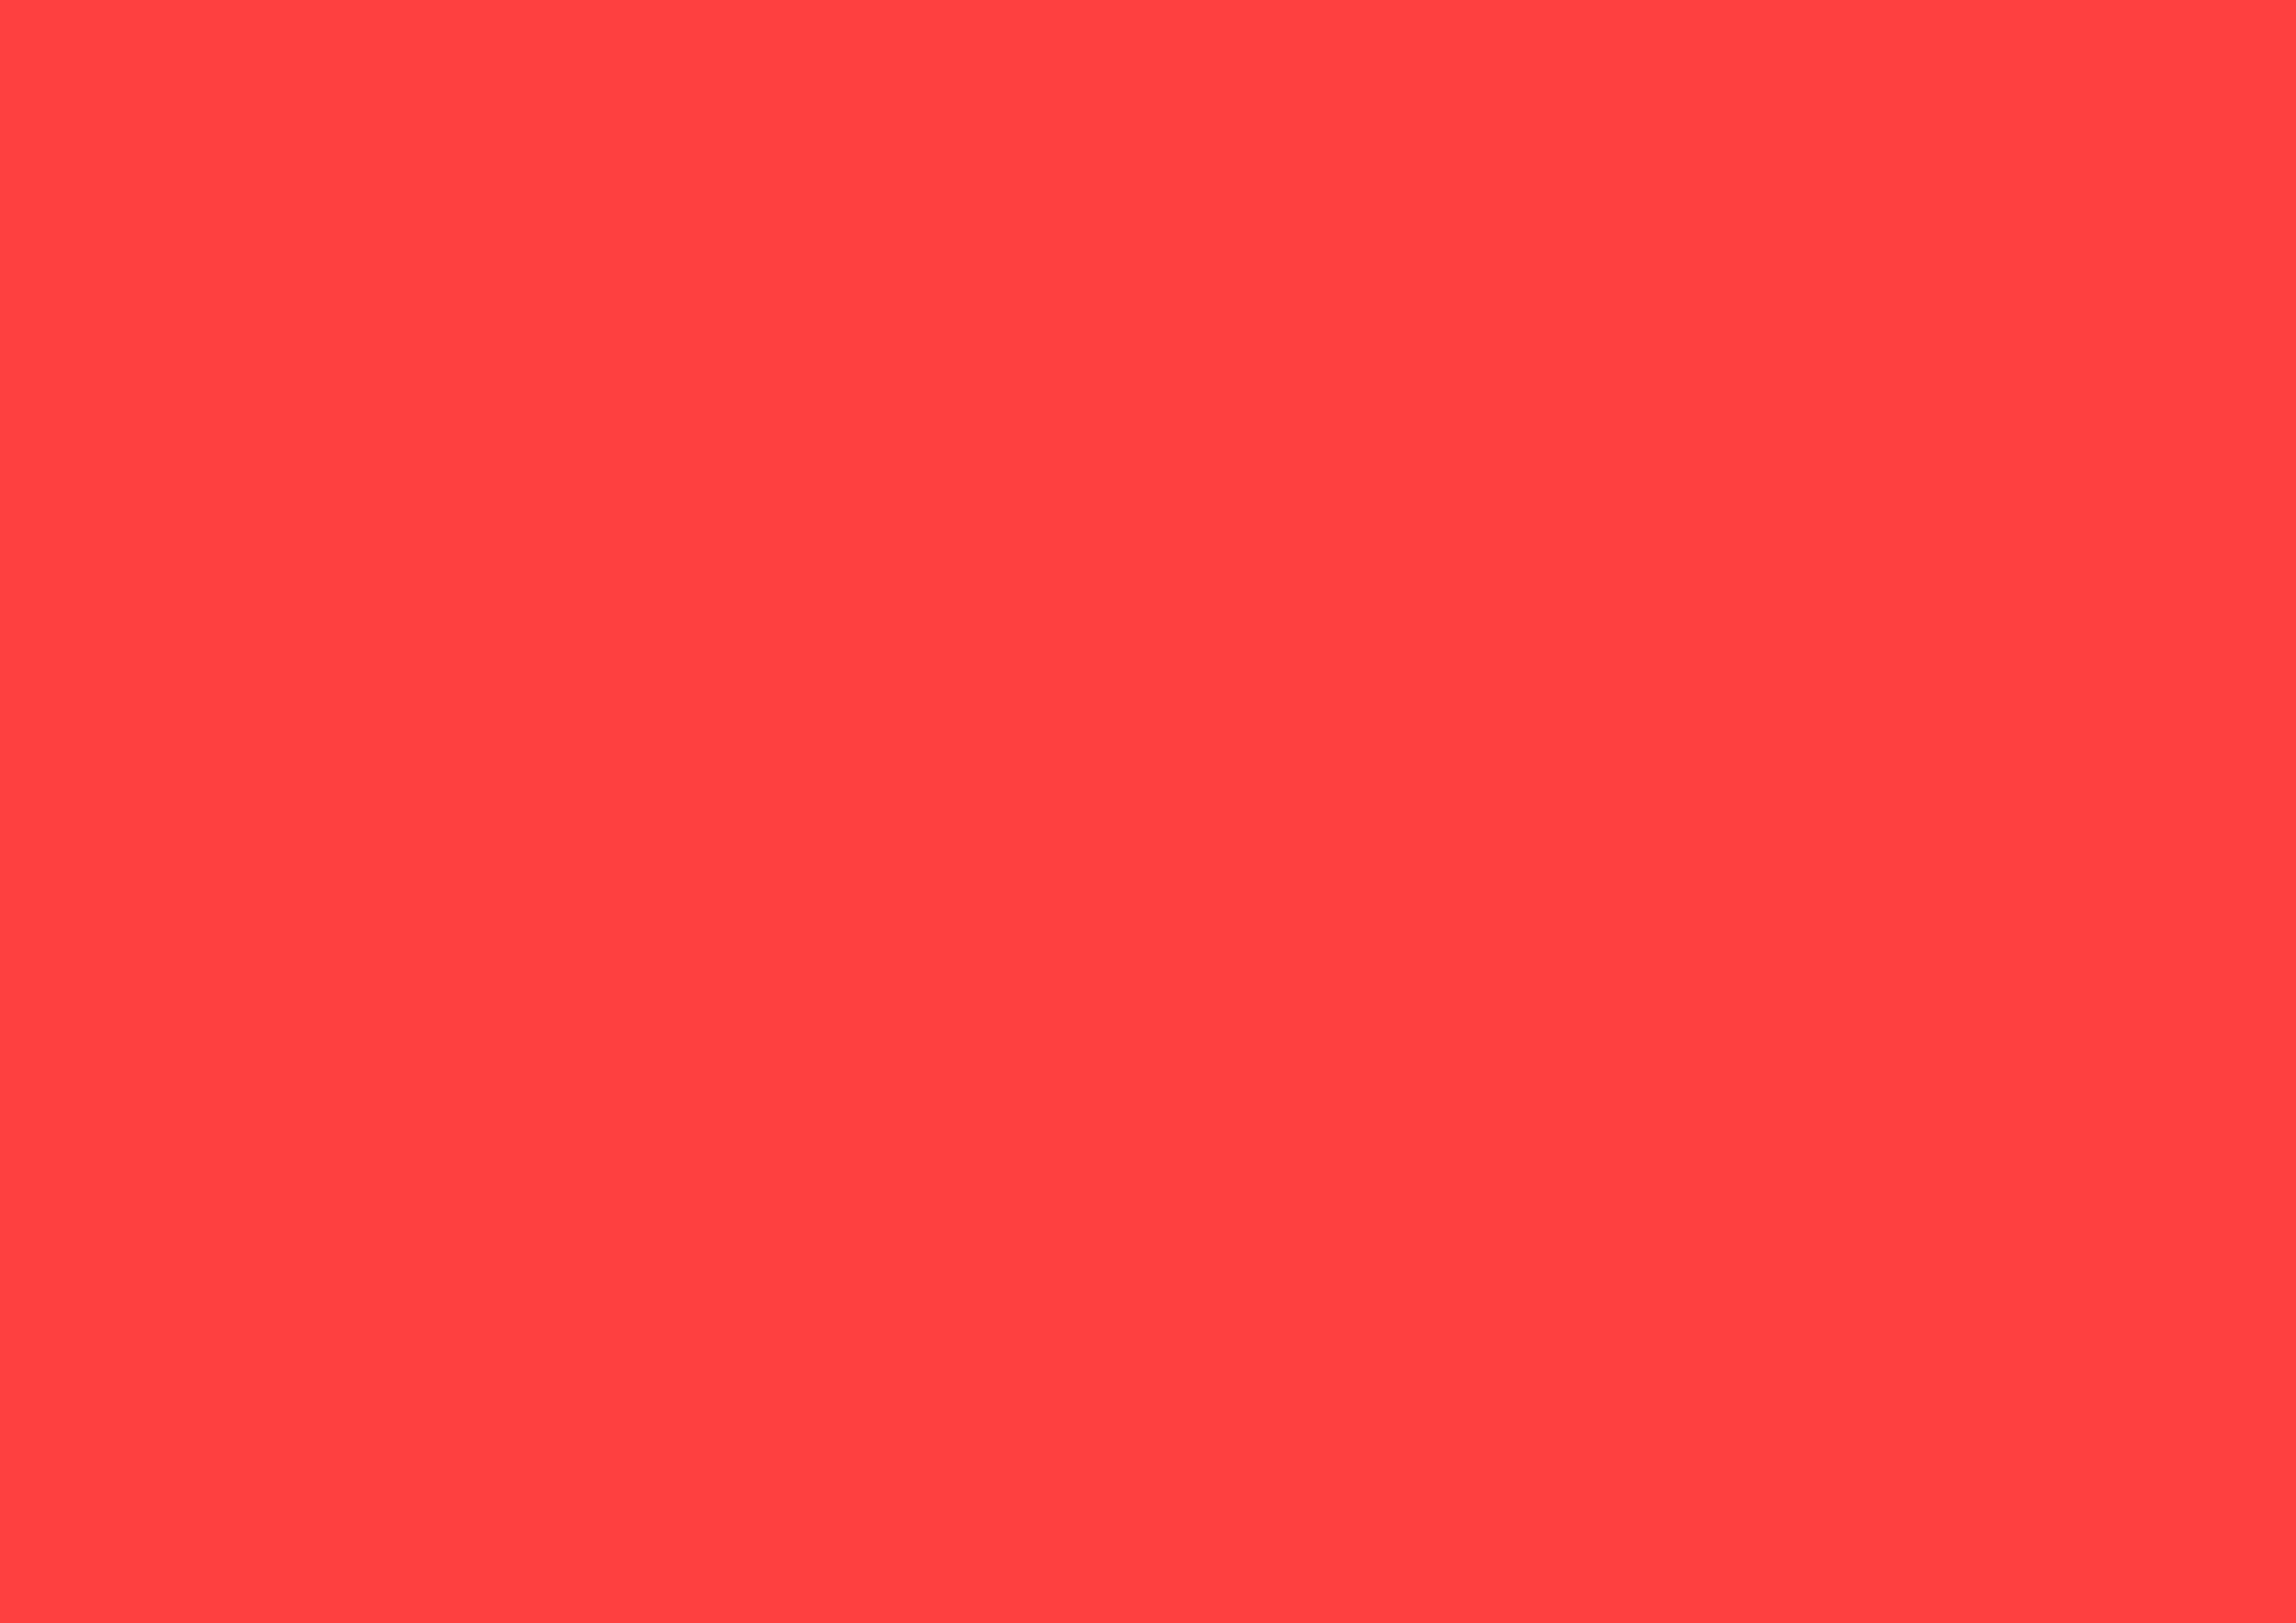 3508x2480 Coral Red Solid Color Background